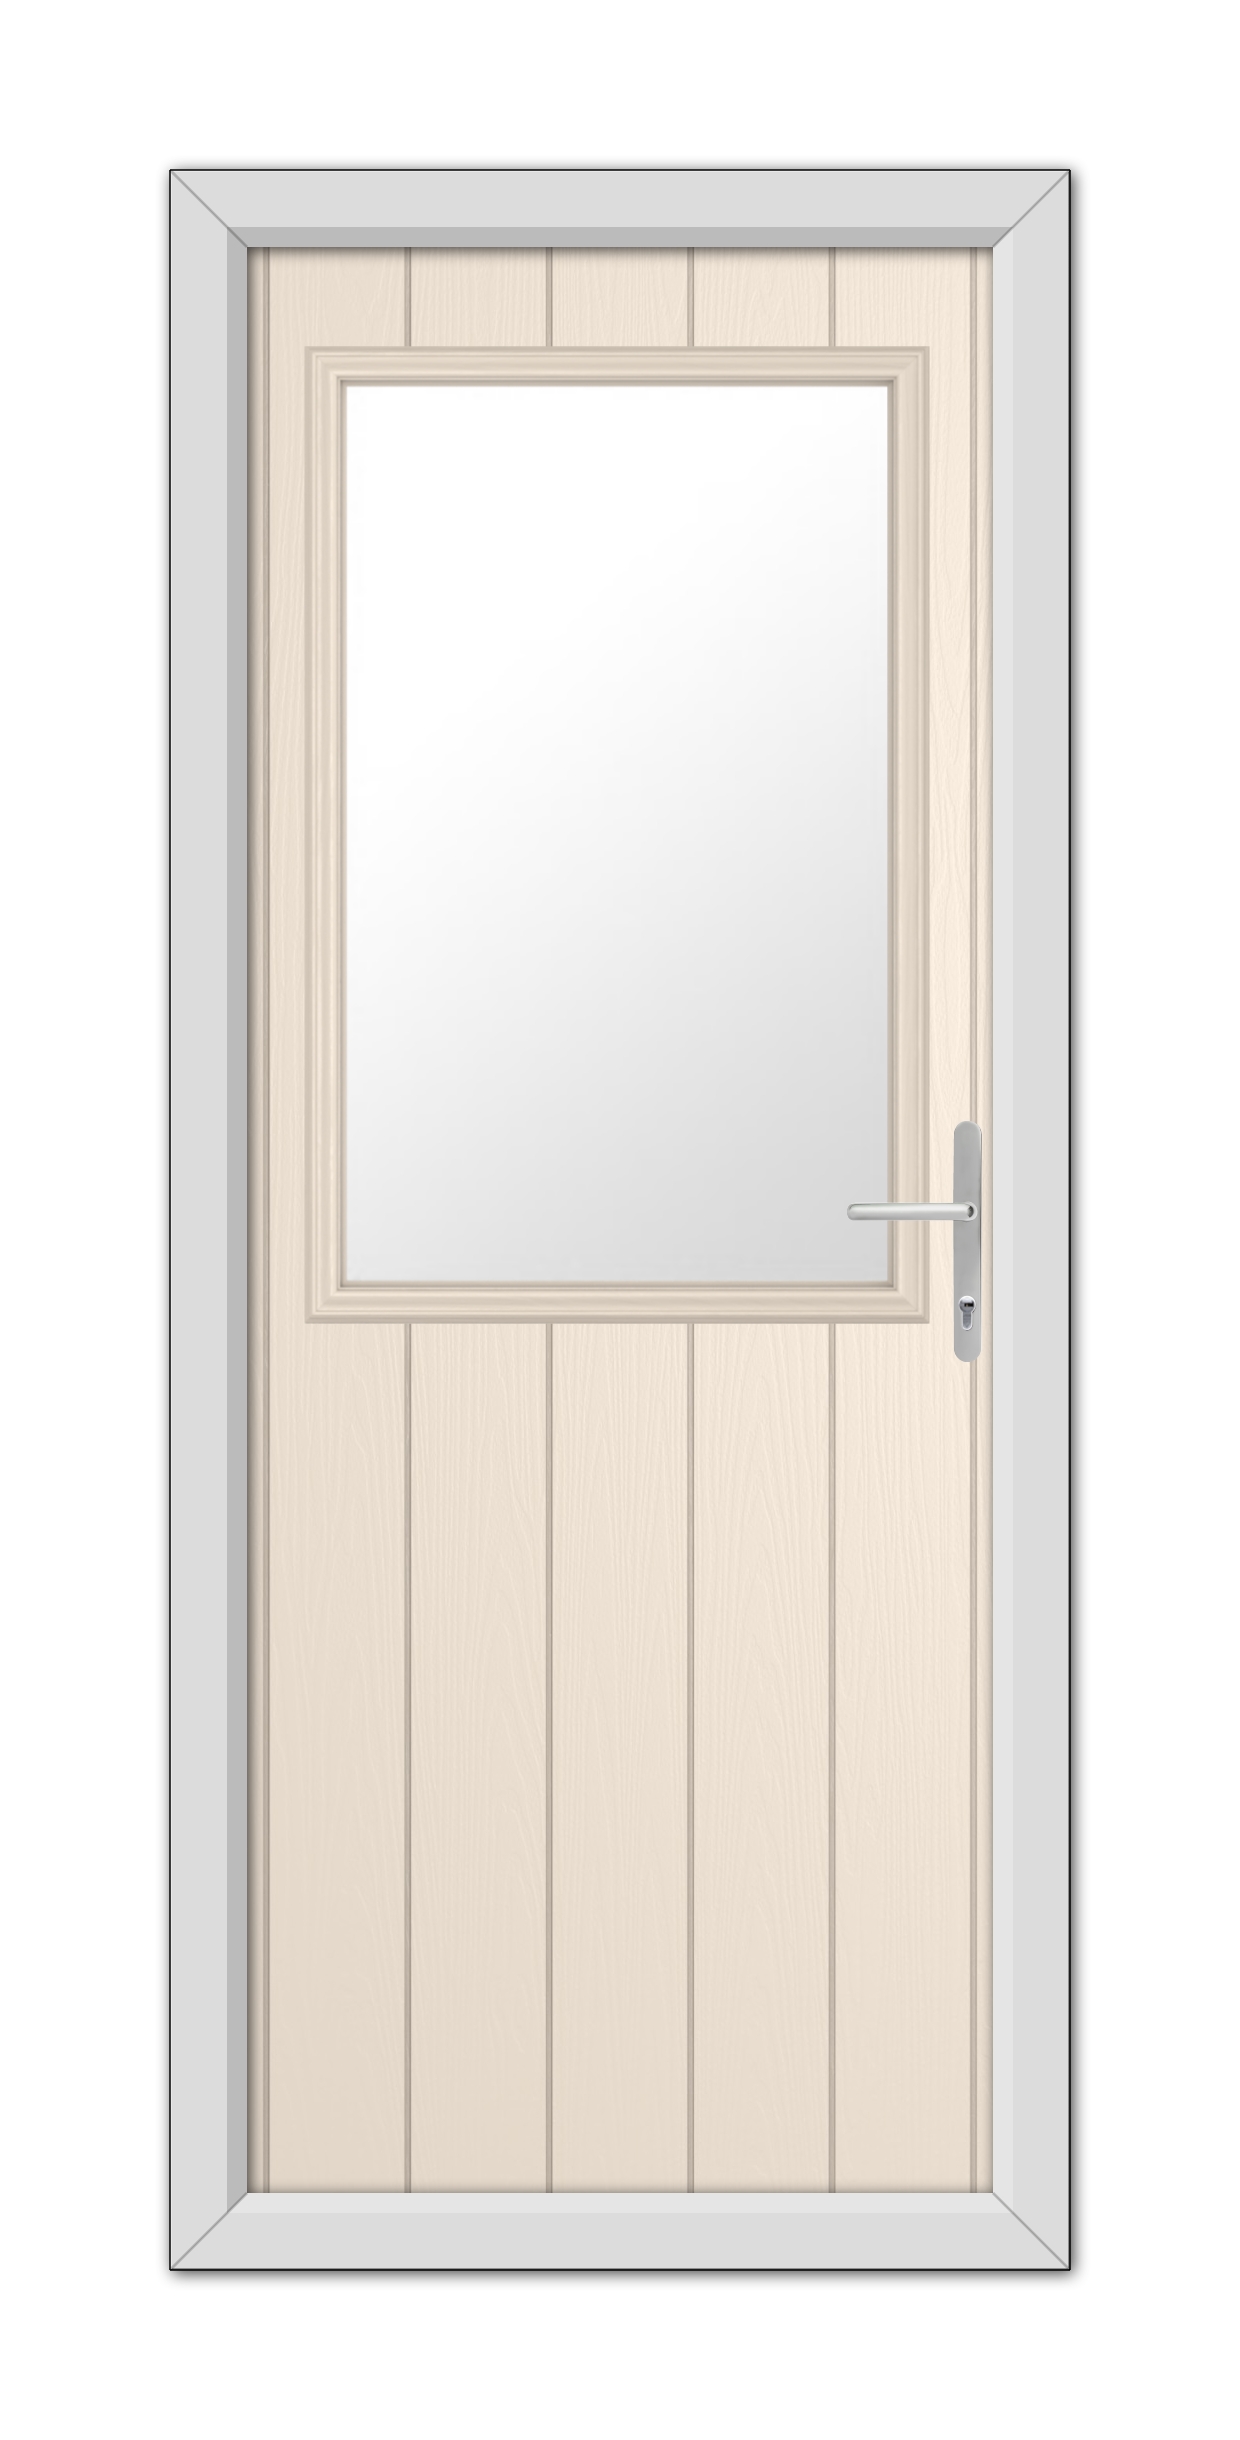 A Cream Clifton Composite Door 48mm Timber Core with a square glass window and a metallic handle, framed within a gray door frame.